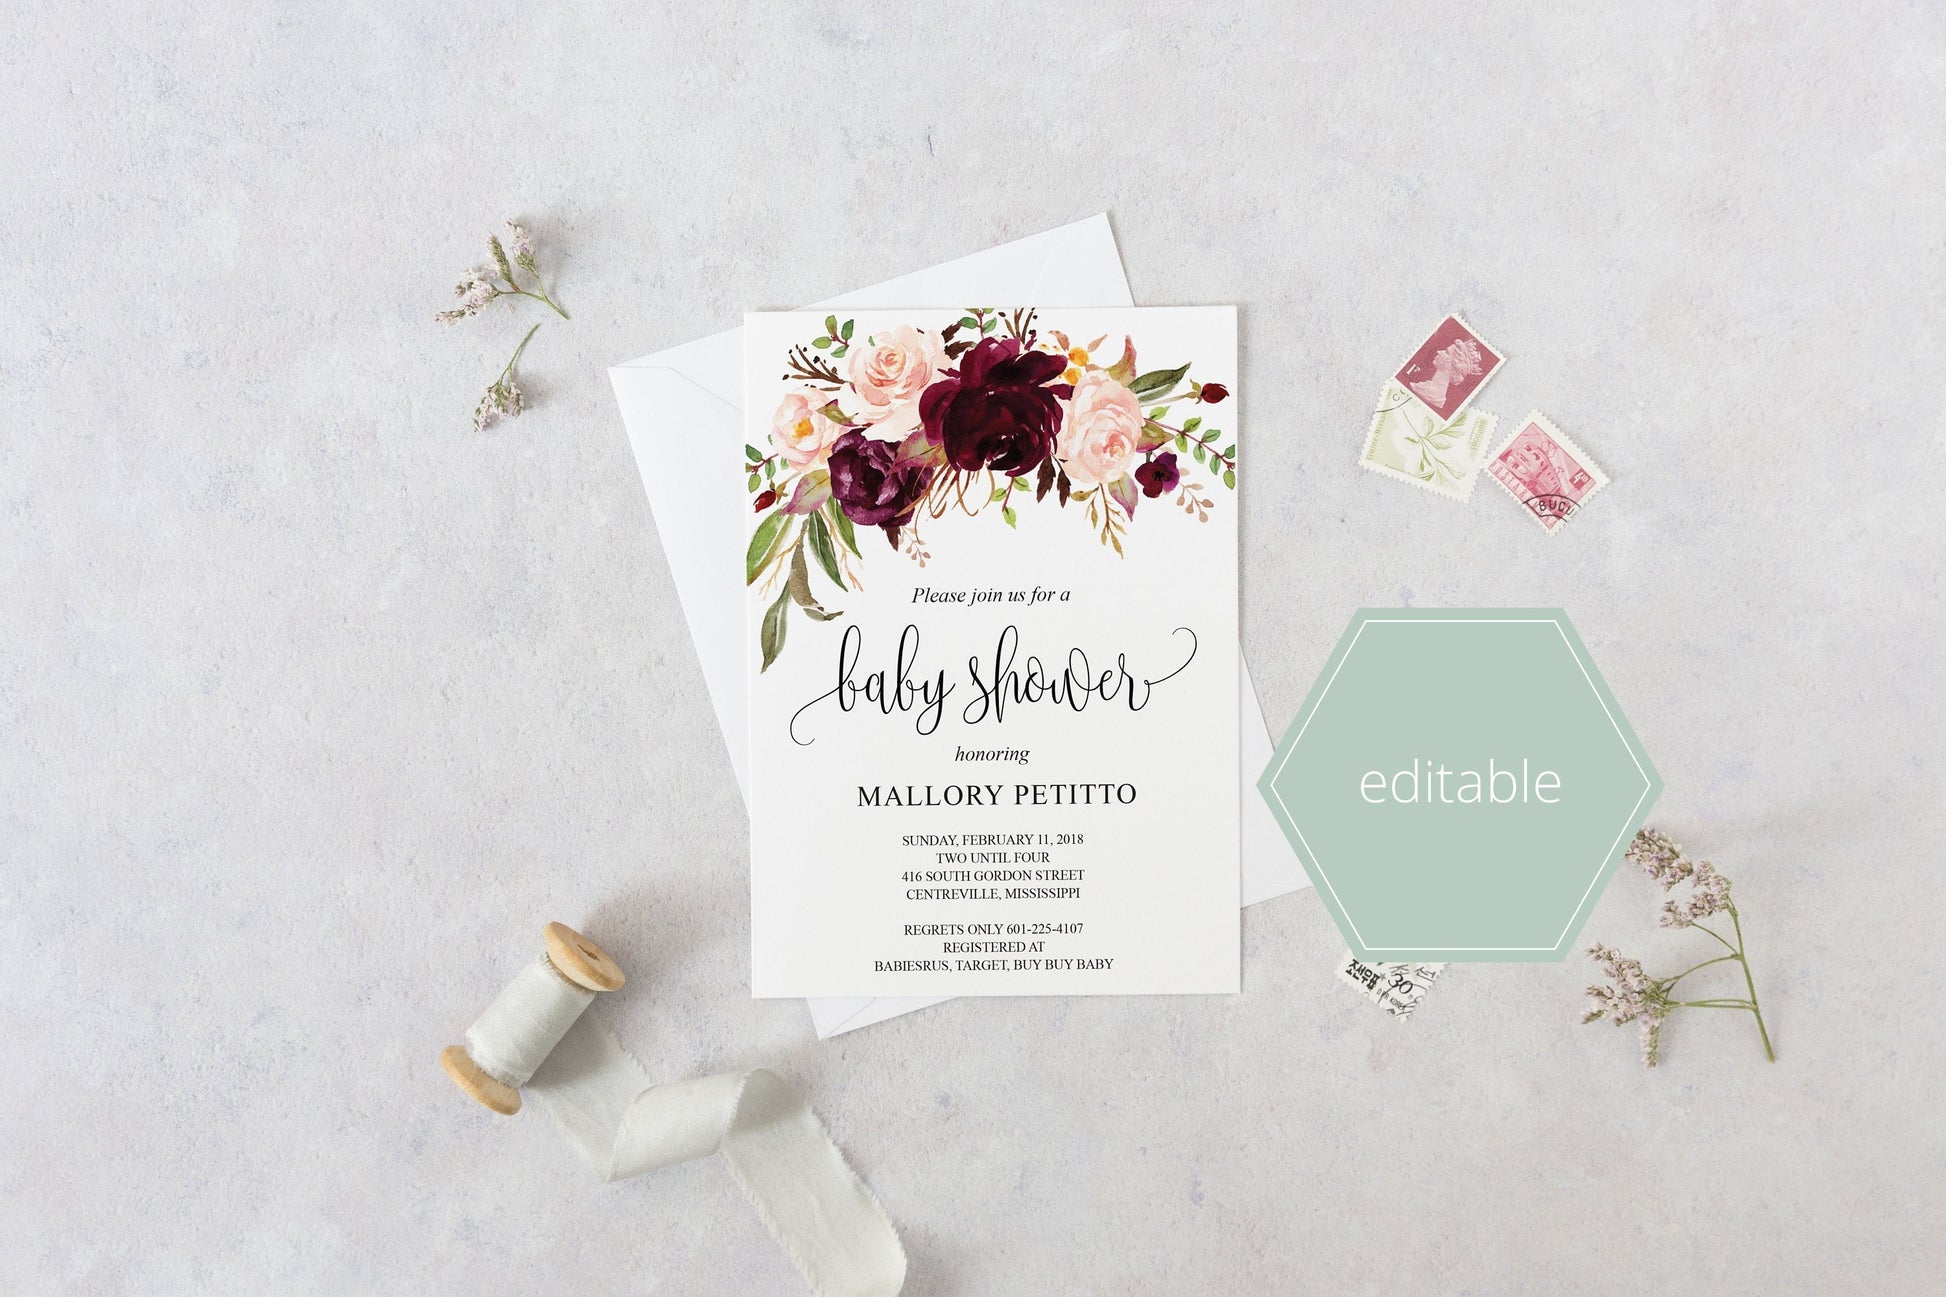 Printable Baby Shower Invitation Template, Baby Shower invite, Burgundy, Floral, Invitation, Baby Shower Invites - MPU78  SAVVY PAPER CO